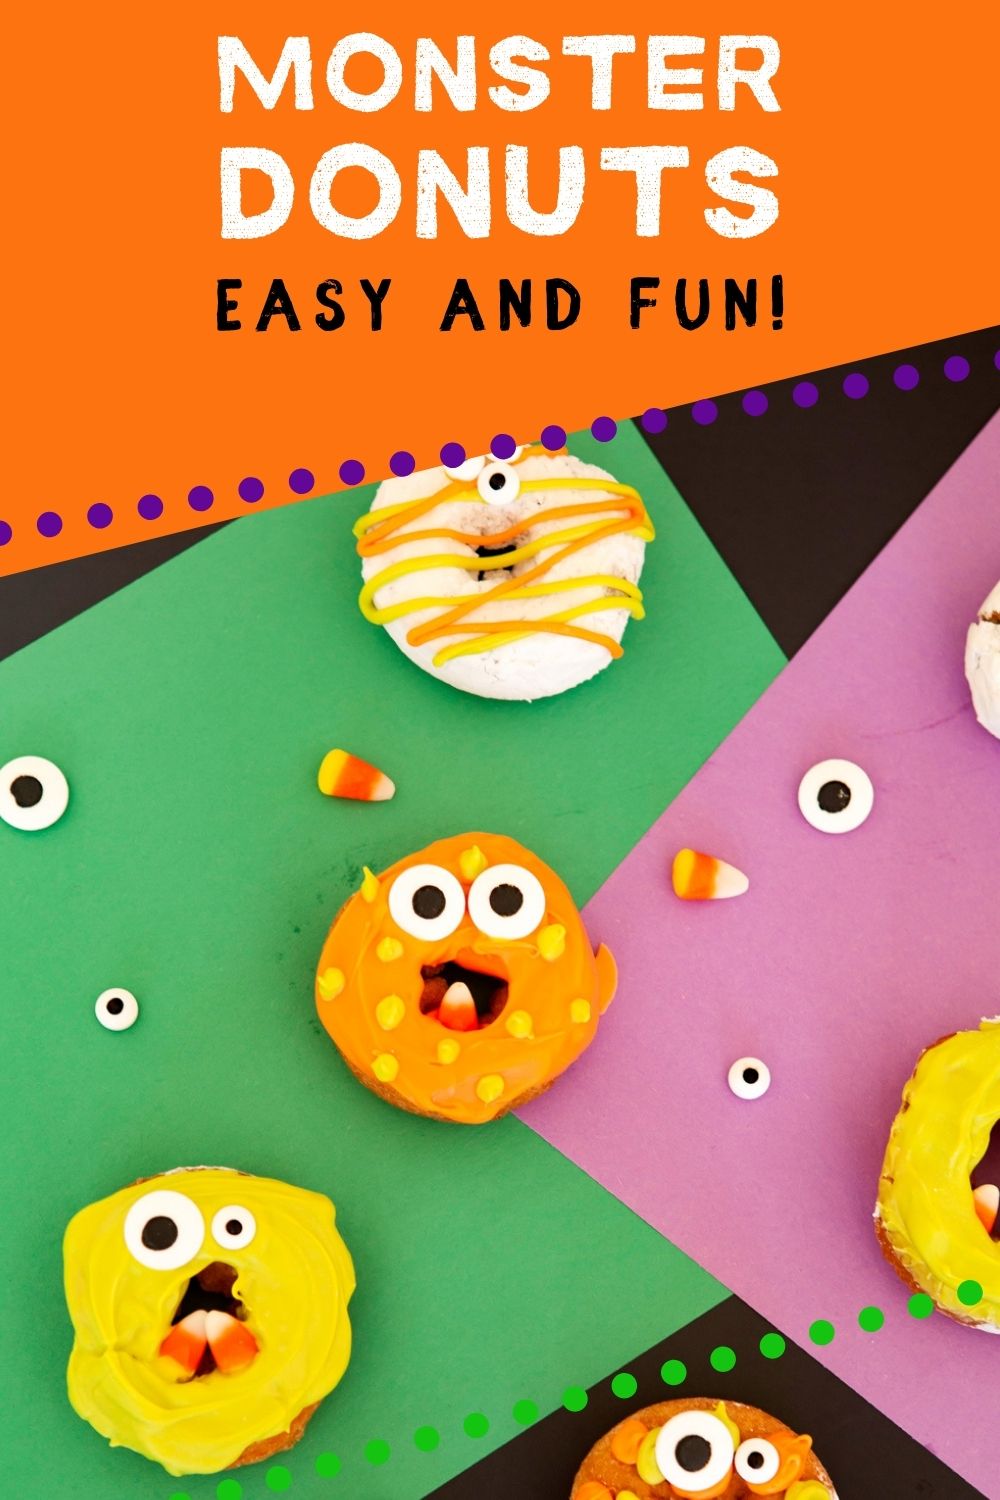 pinnaple image of monster donuts on colorful construction paper